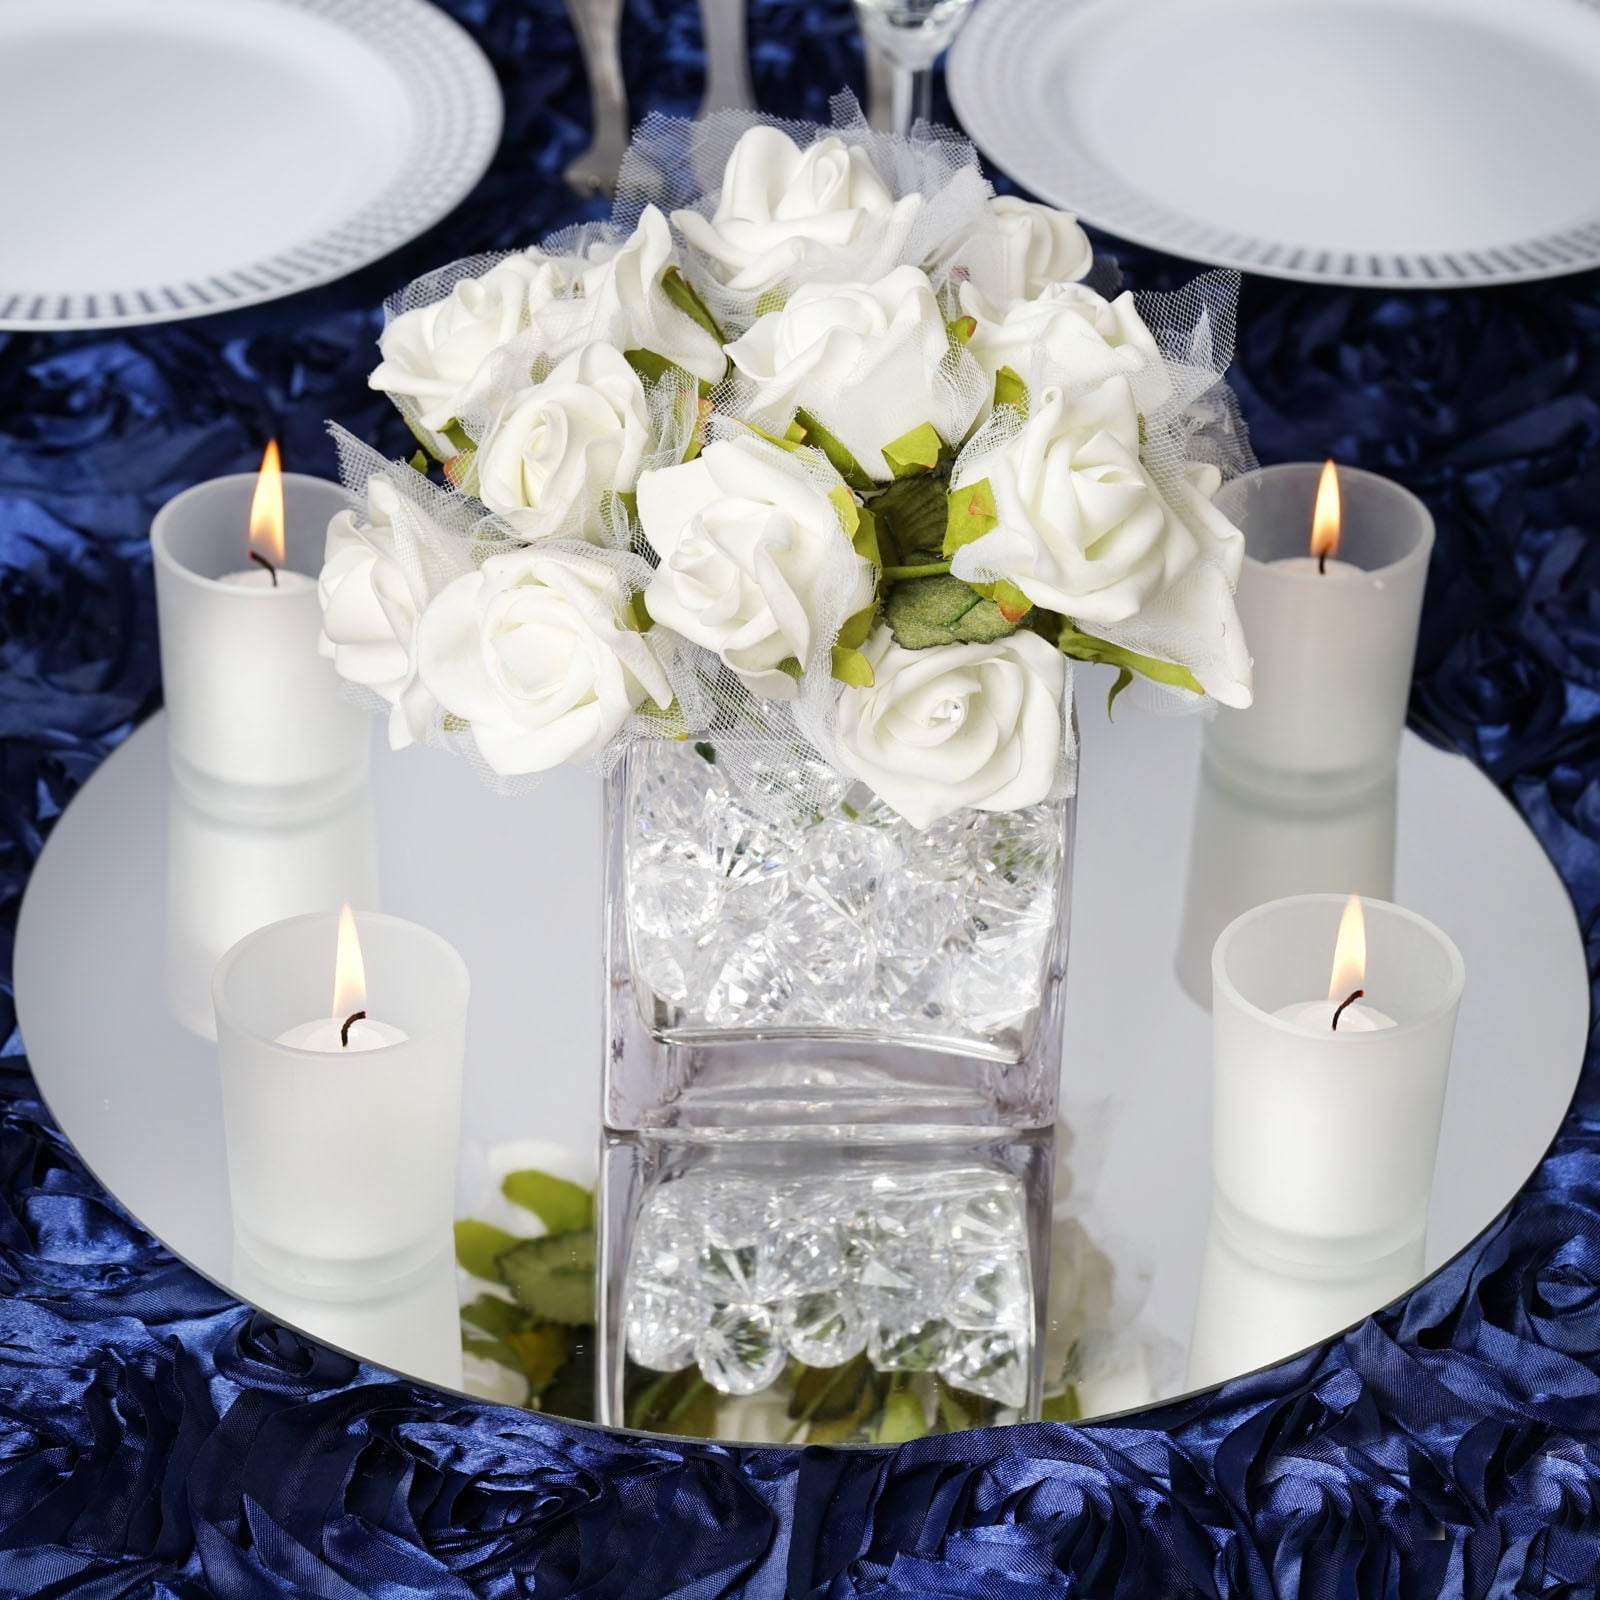 Bulk 24 pieces Round or Square Centerpiece Mirrors for Wedding Table 4in-12in 